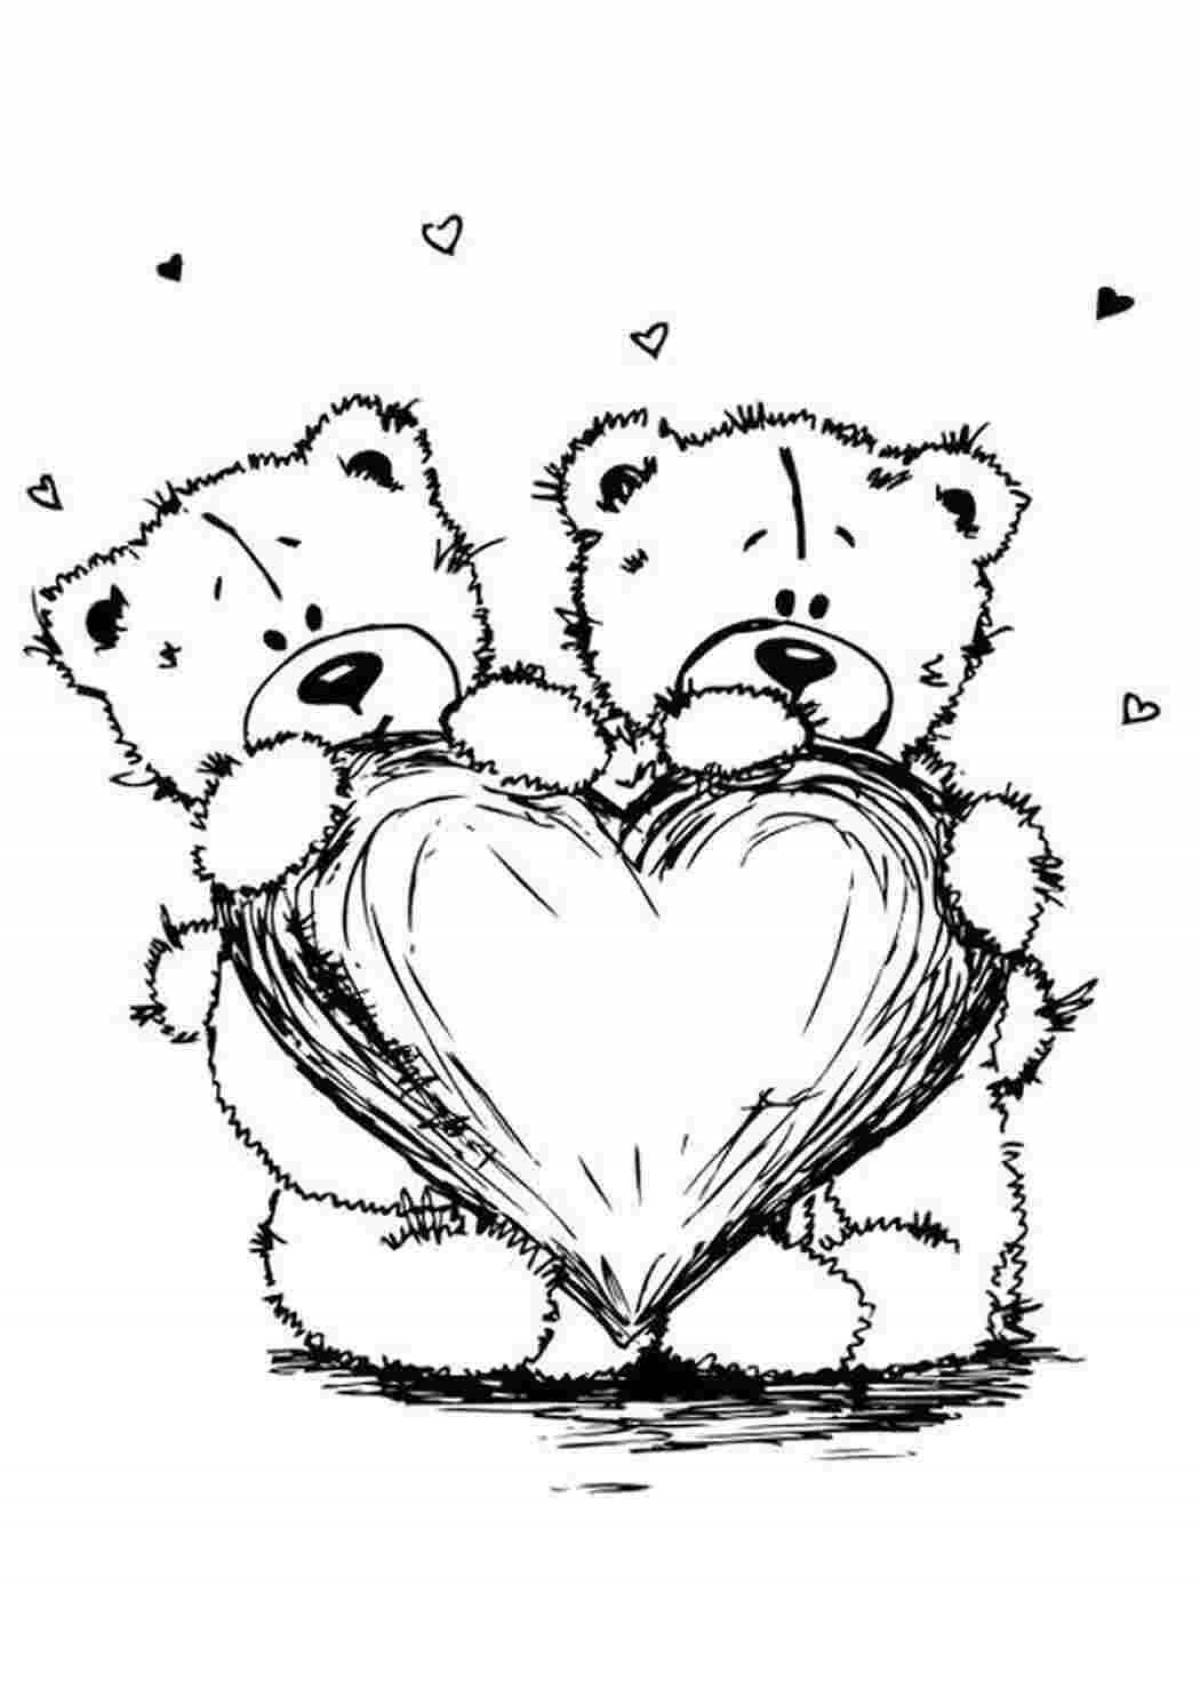 Coloring book bright teddy bear with a heart